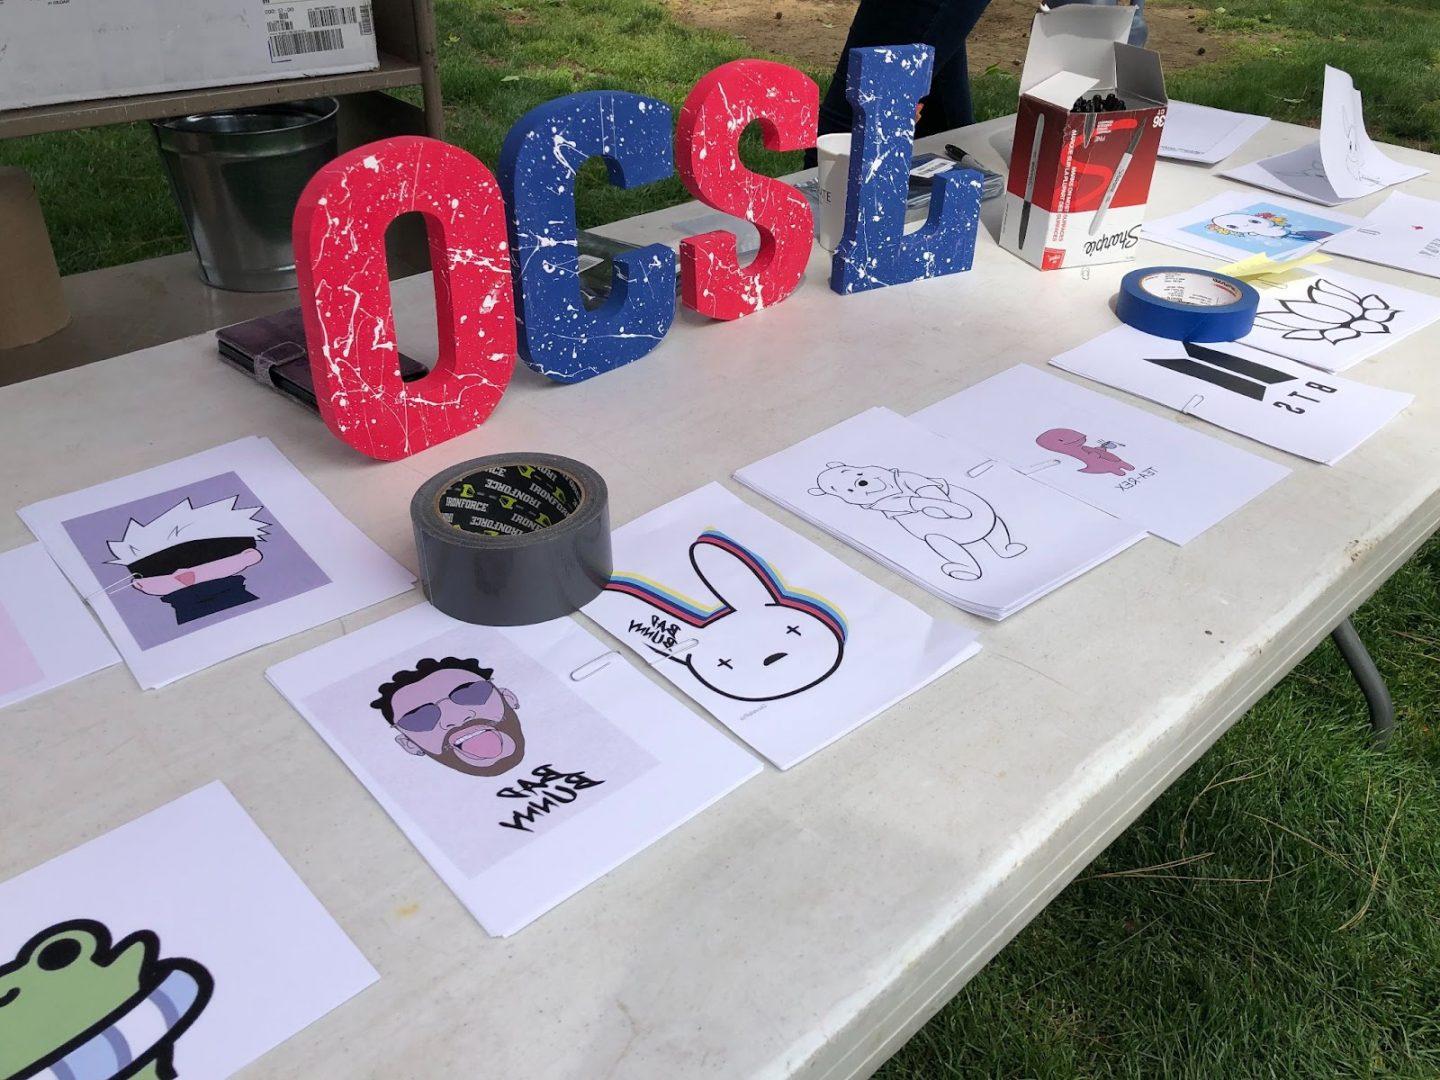 Students recreated images of their favorite celebrities and characters during the Glass Paint Social event. (Julia Espinoza/The Collegian)